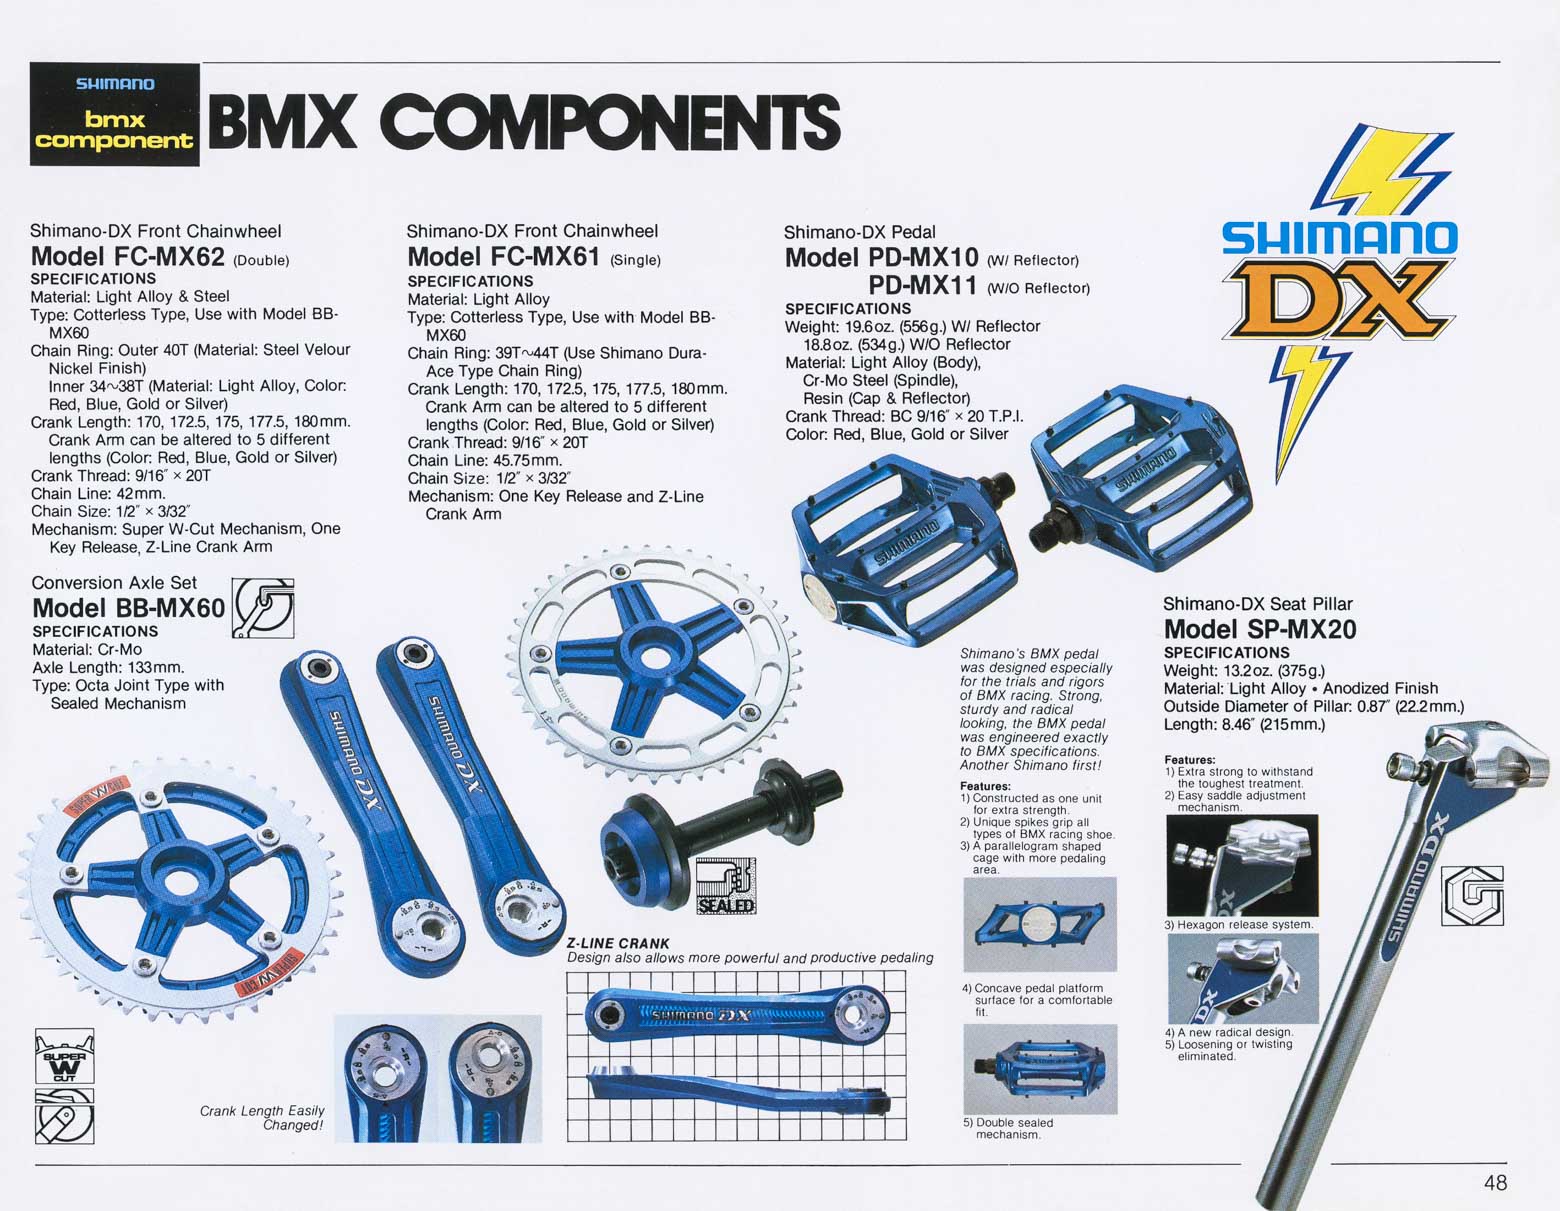 Shimano Bicycle System Components 1981 page 48 main image